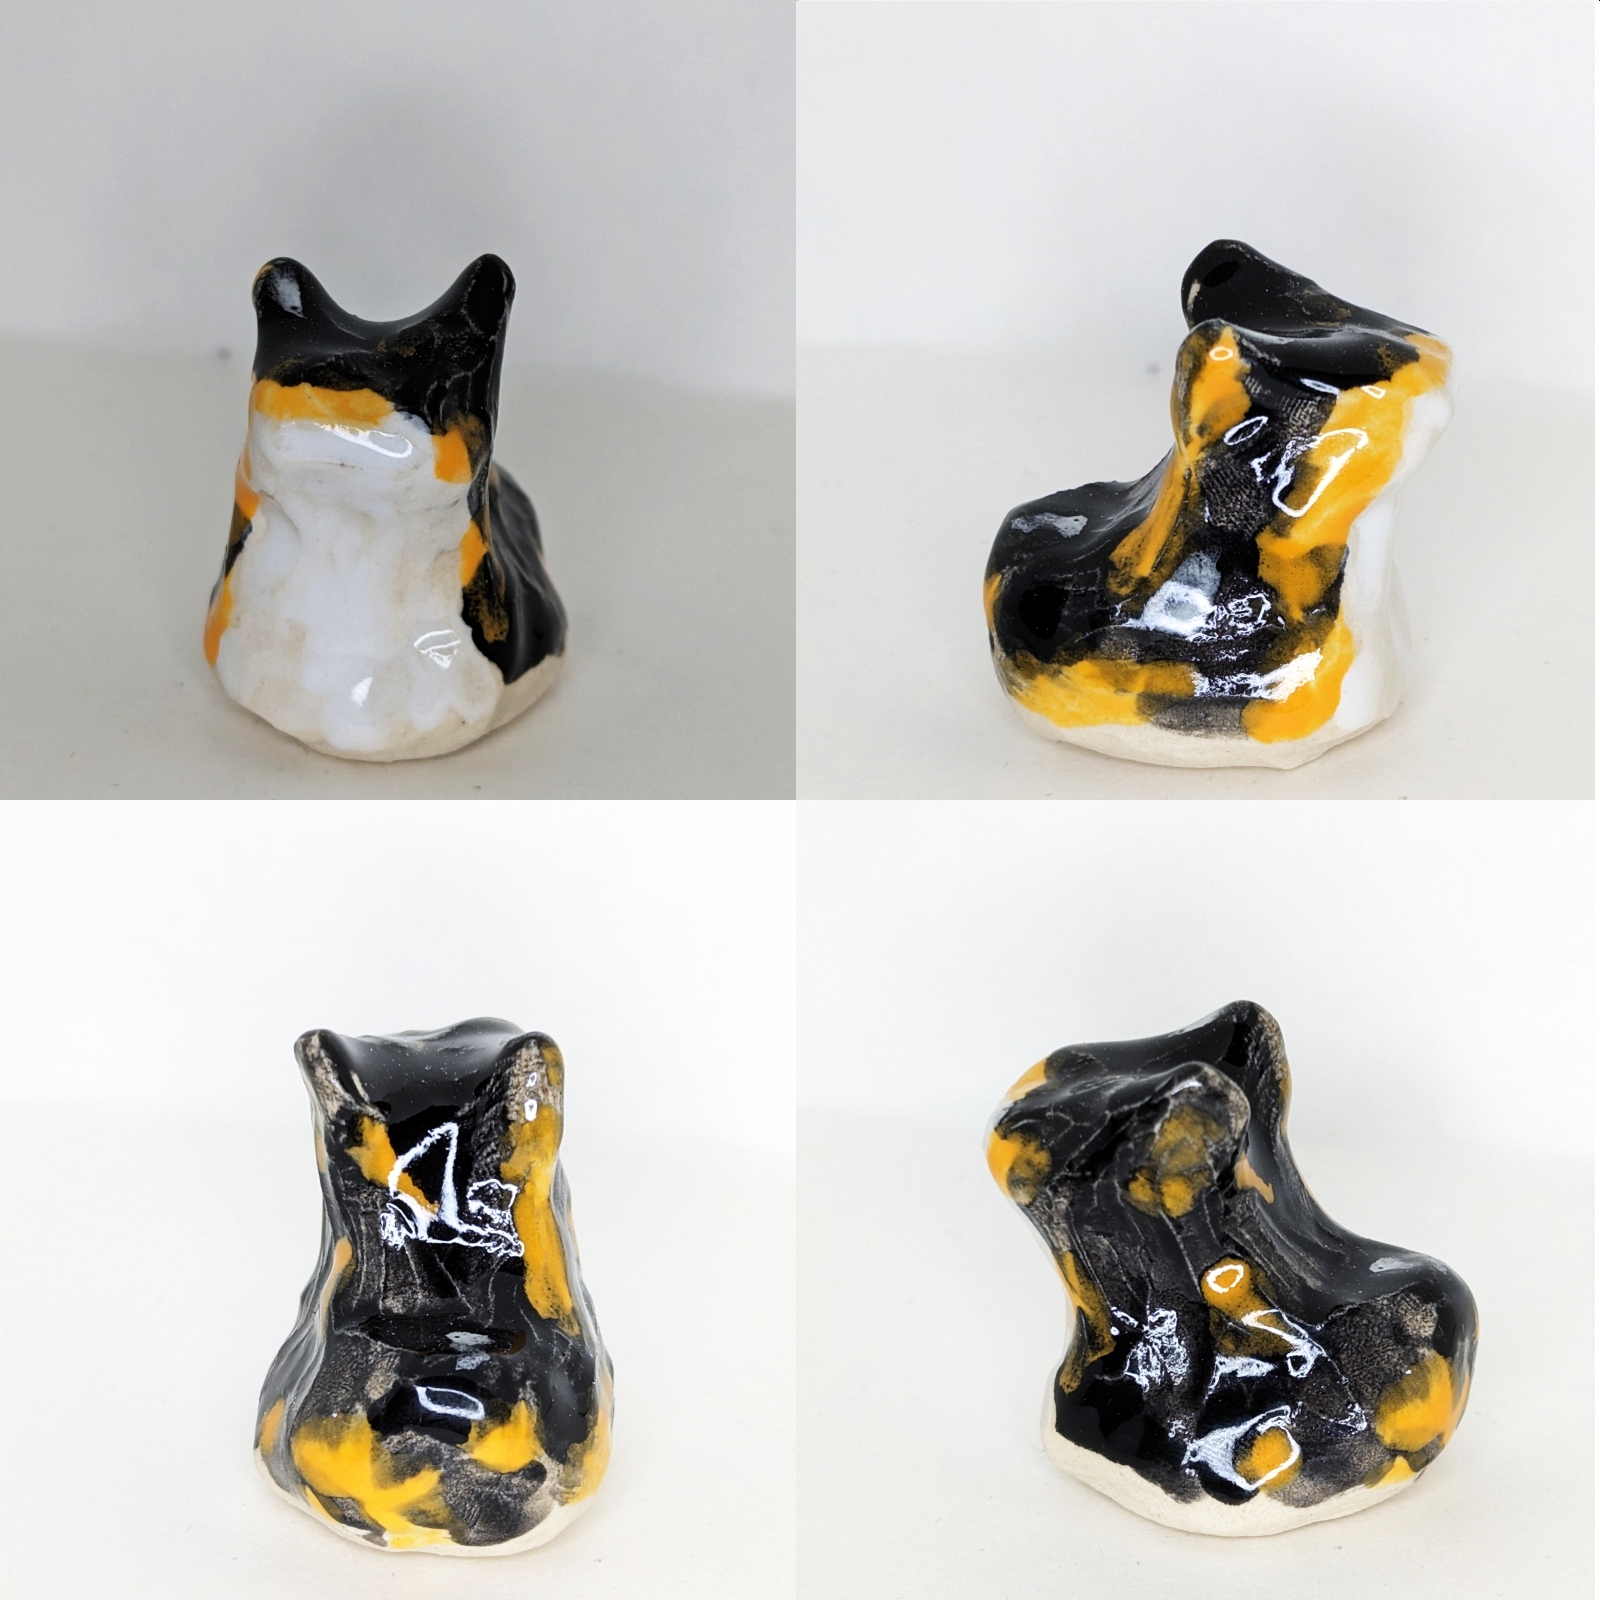 4 views of a ceramic calico cat in the sitting loaf position.